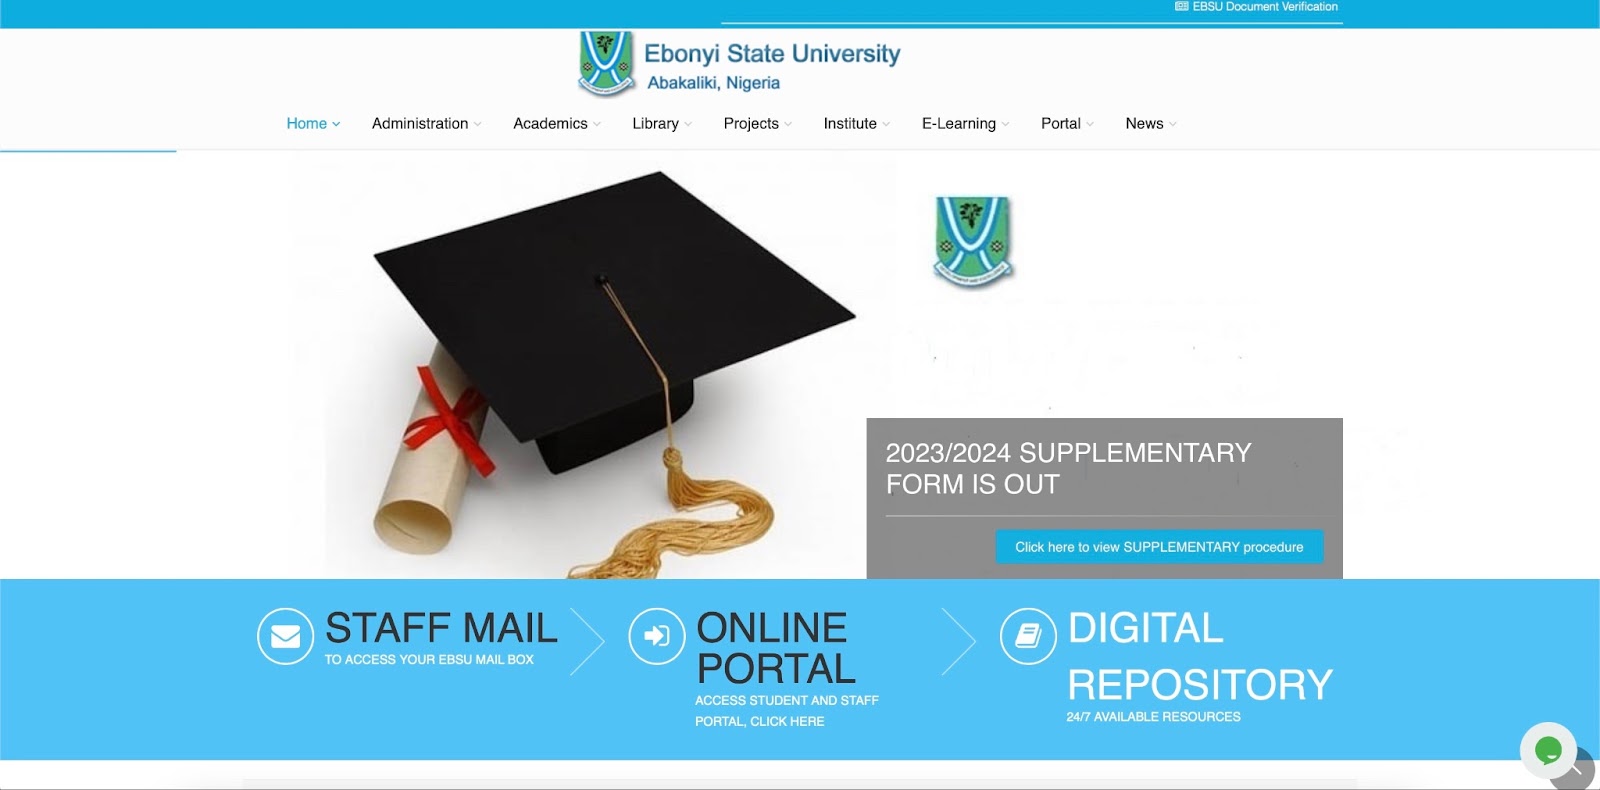 Home page of the EBSU website